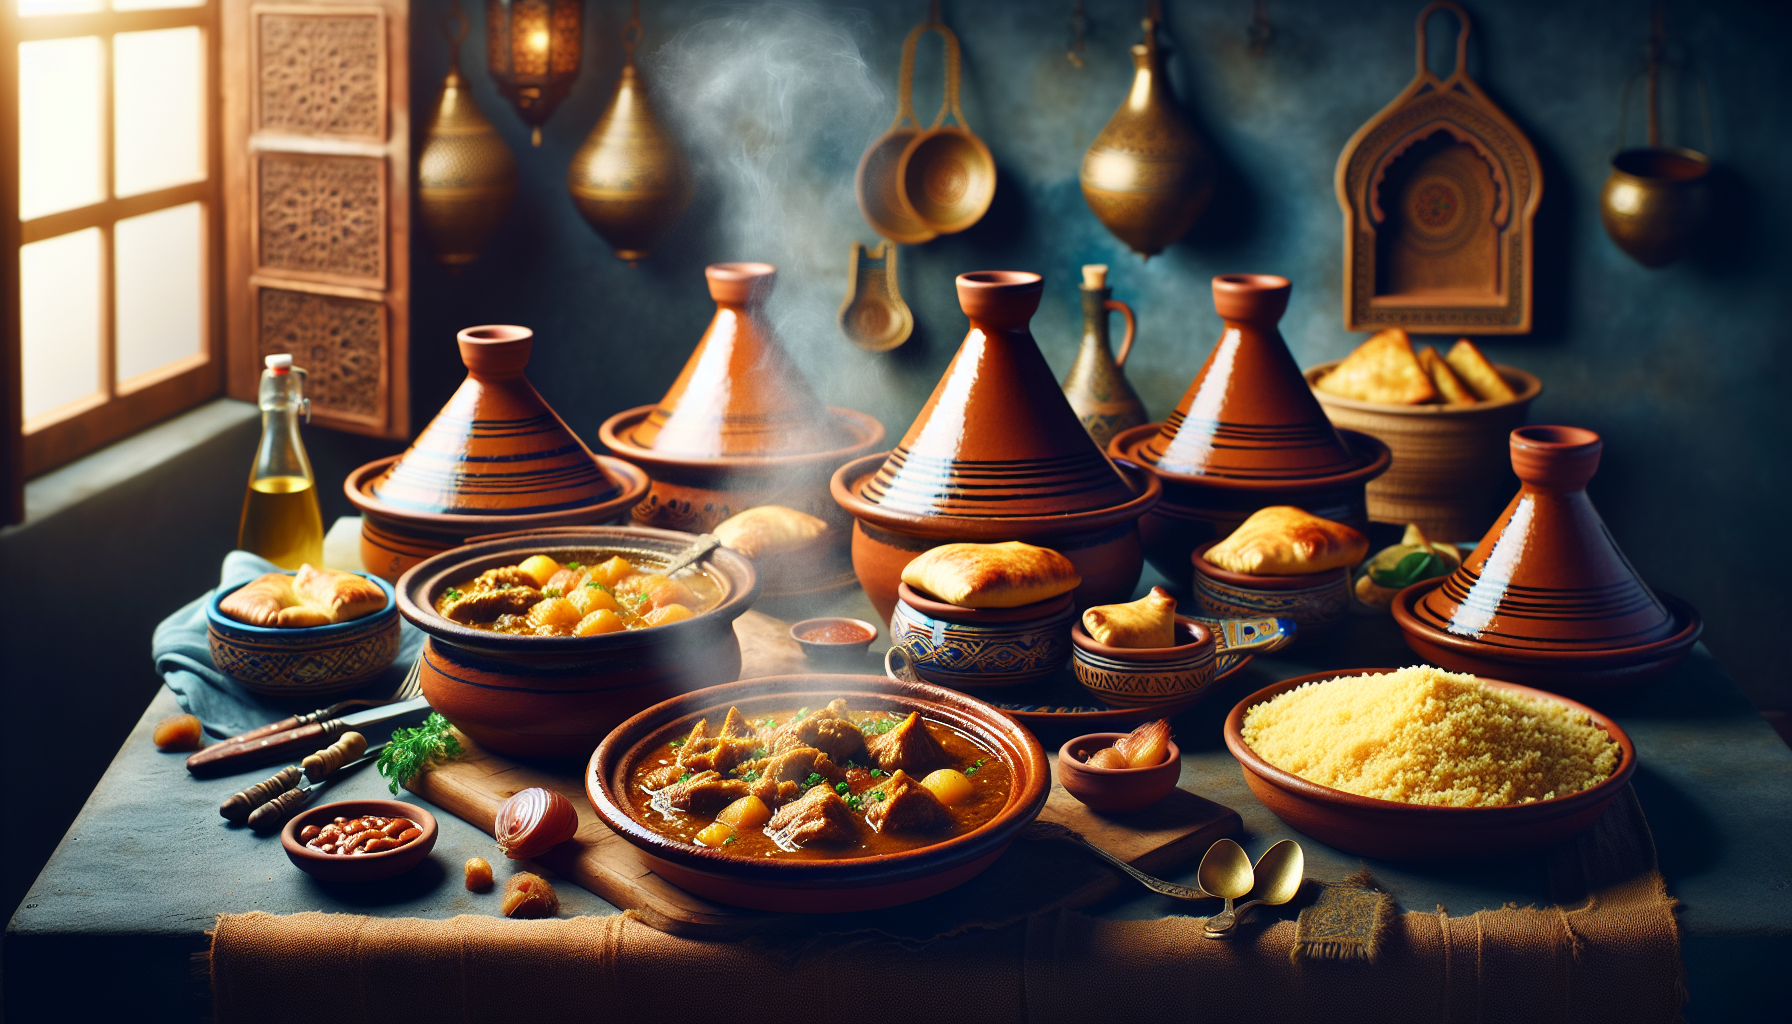 Whats Your Favorite Moroccan Comfort Dish For A Cozy Dinner At Home?